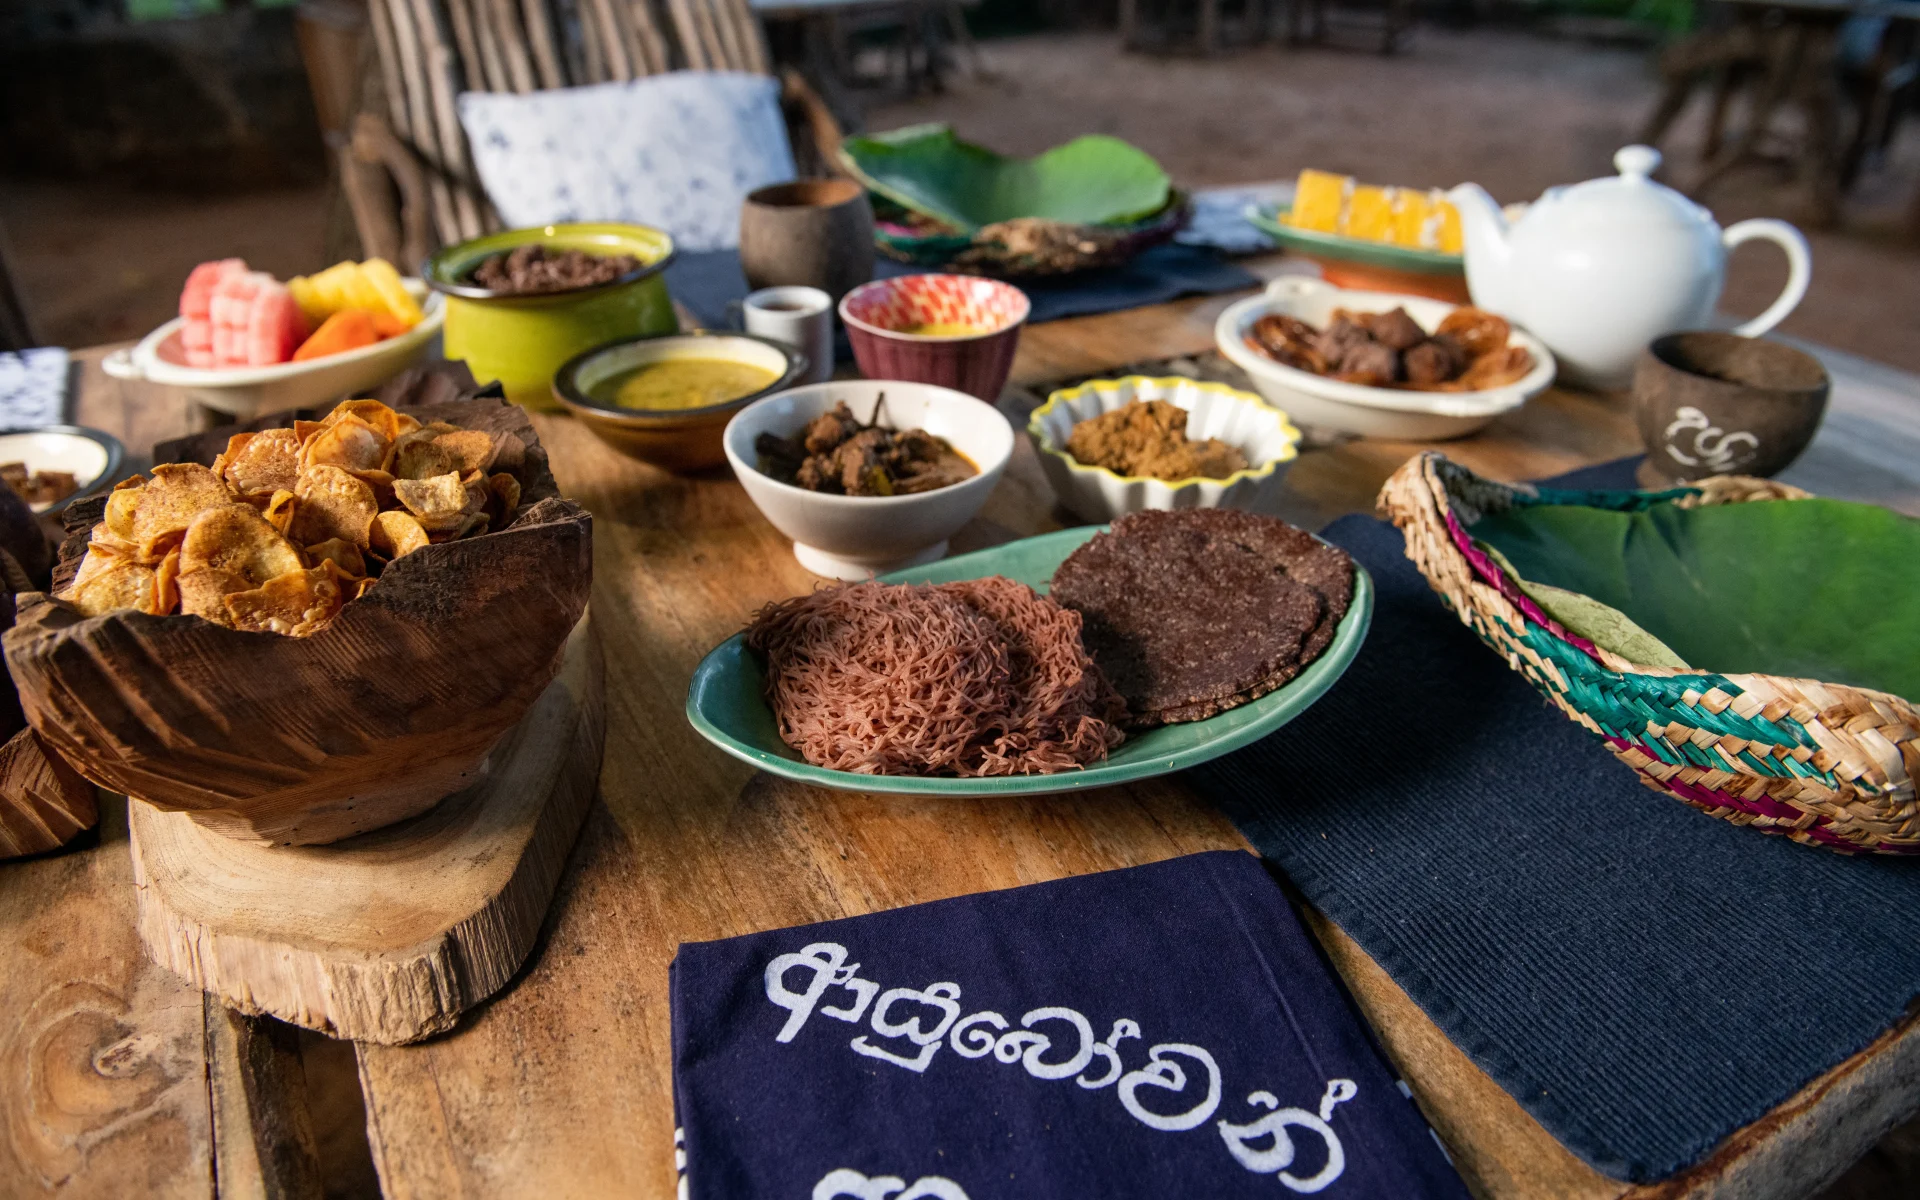 A range of traditional Sri Lankan dishes are laid out on a wooden table.